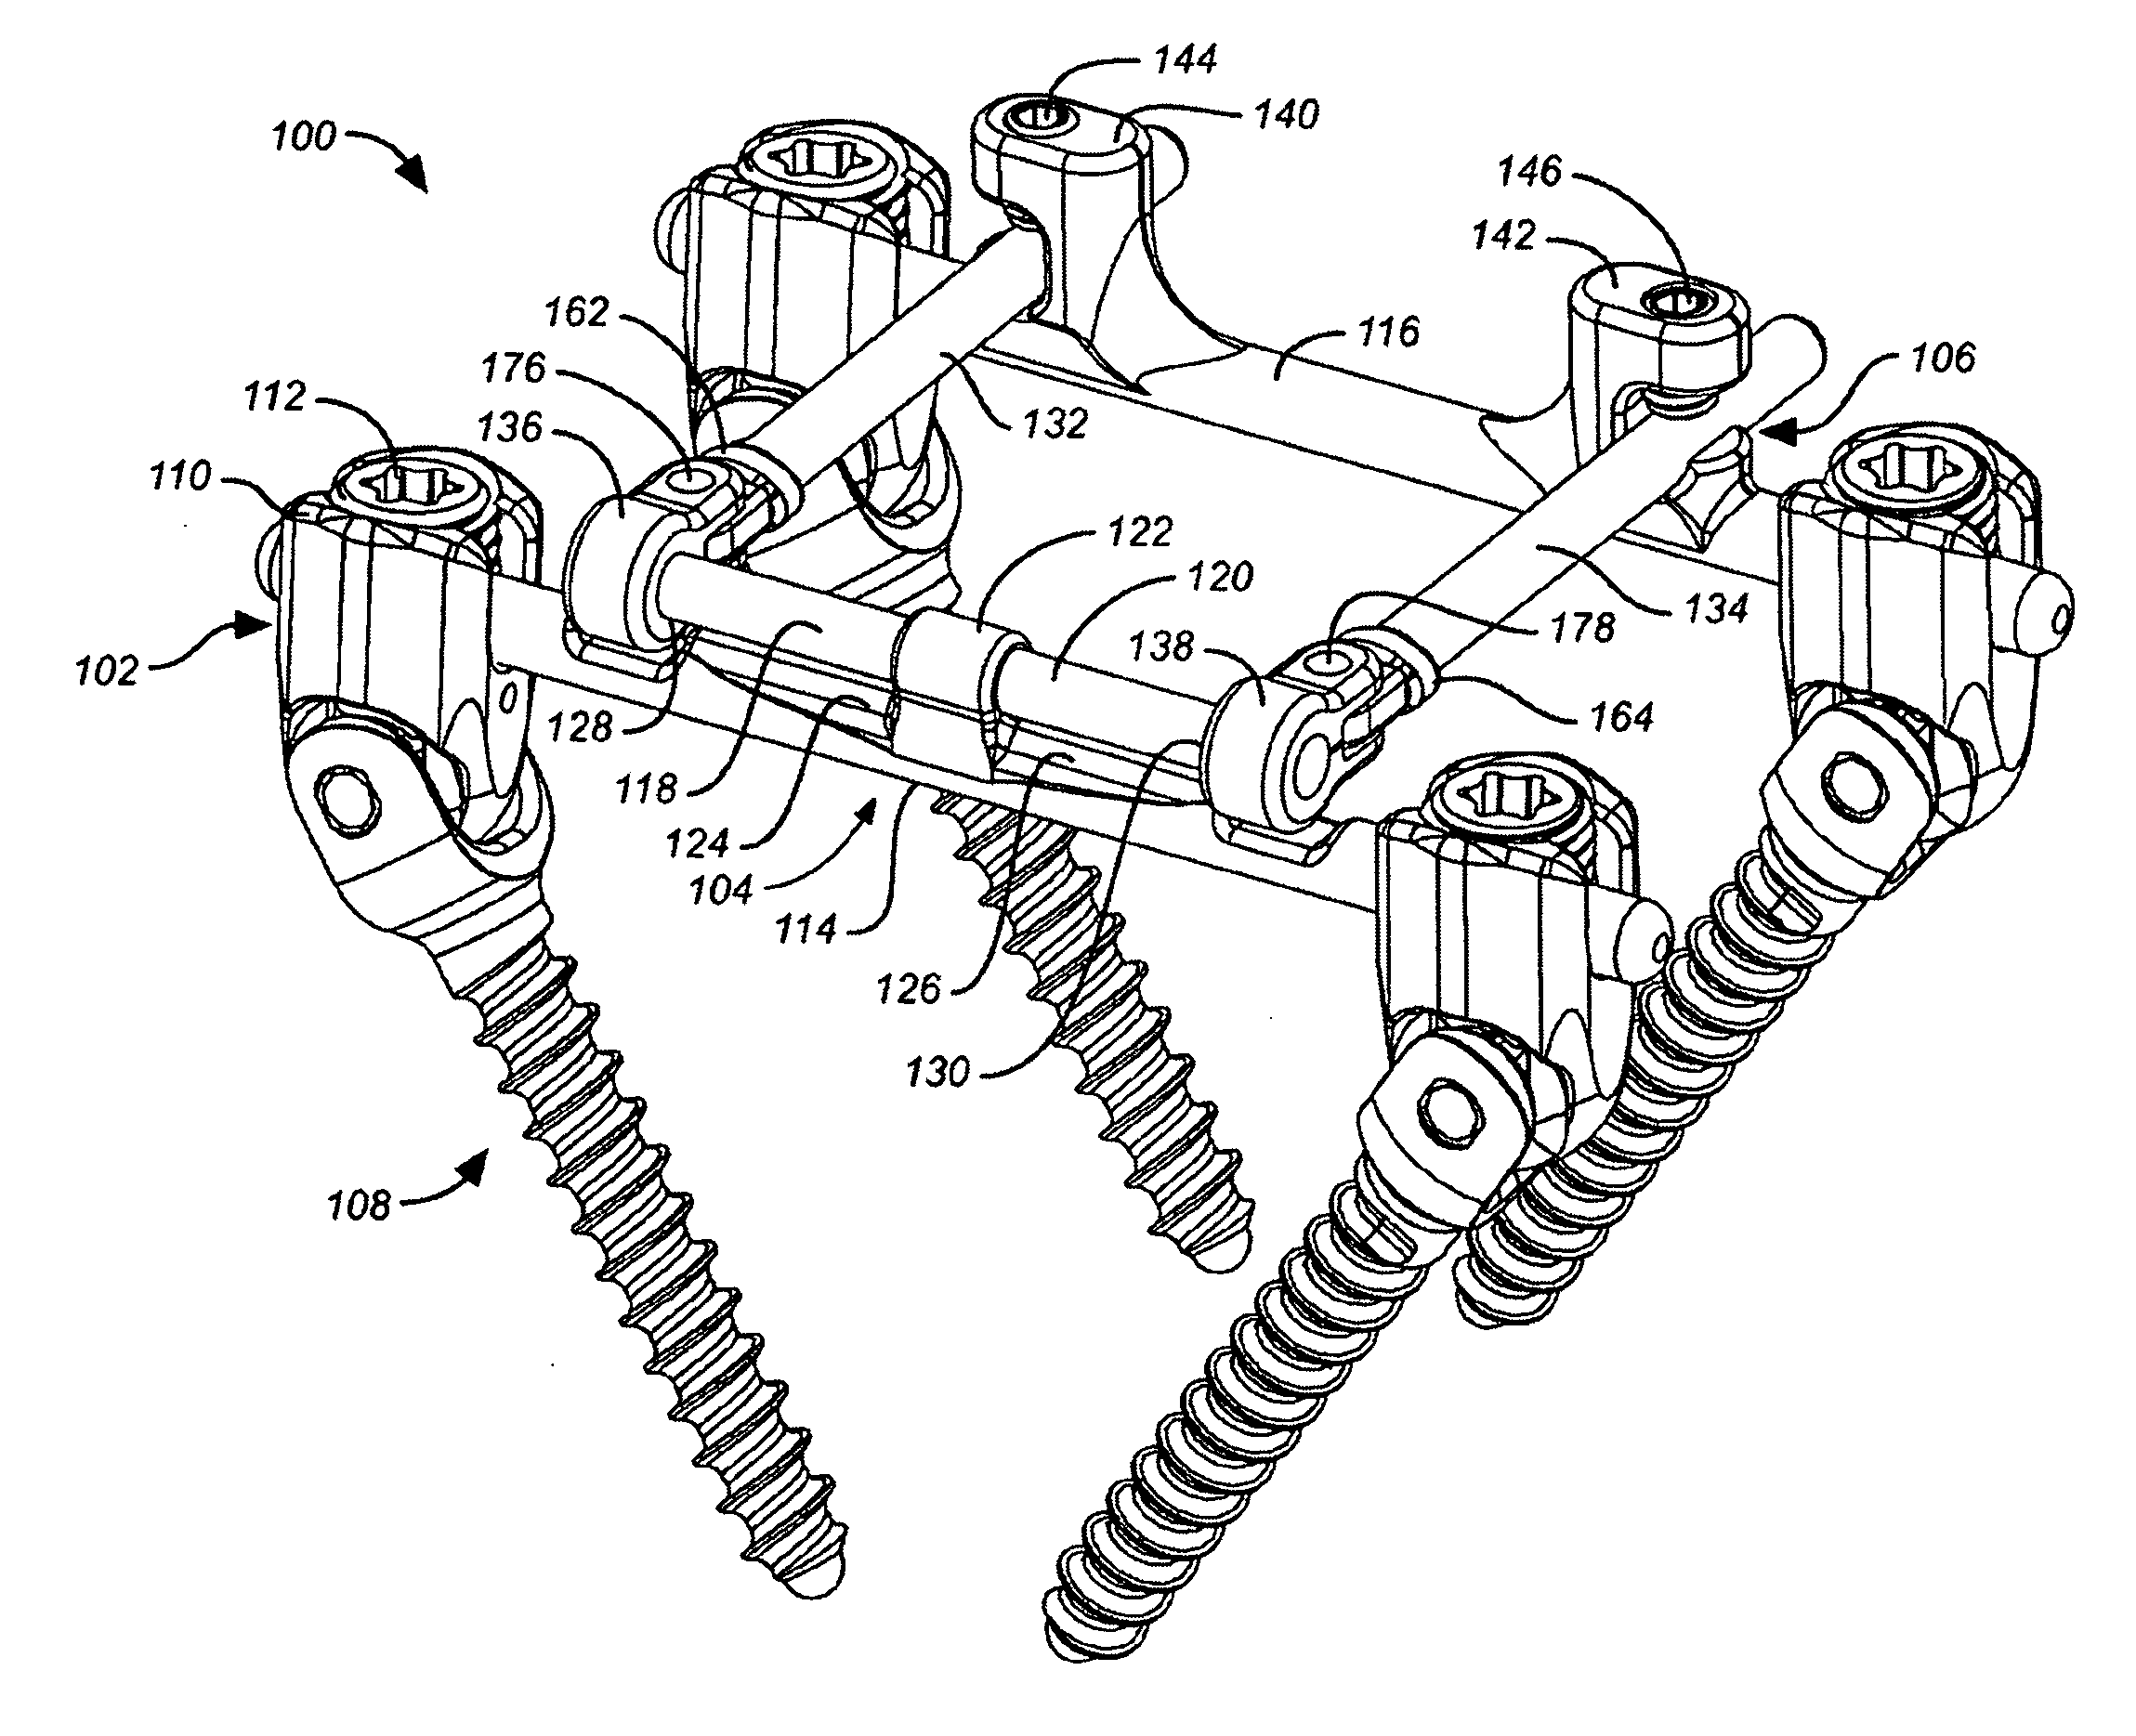 Deflection rod system with a non-linear deflection to load characteristic for a dynamic stabilization and motion preservation spinal implantation system and method